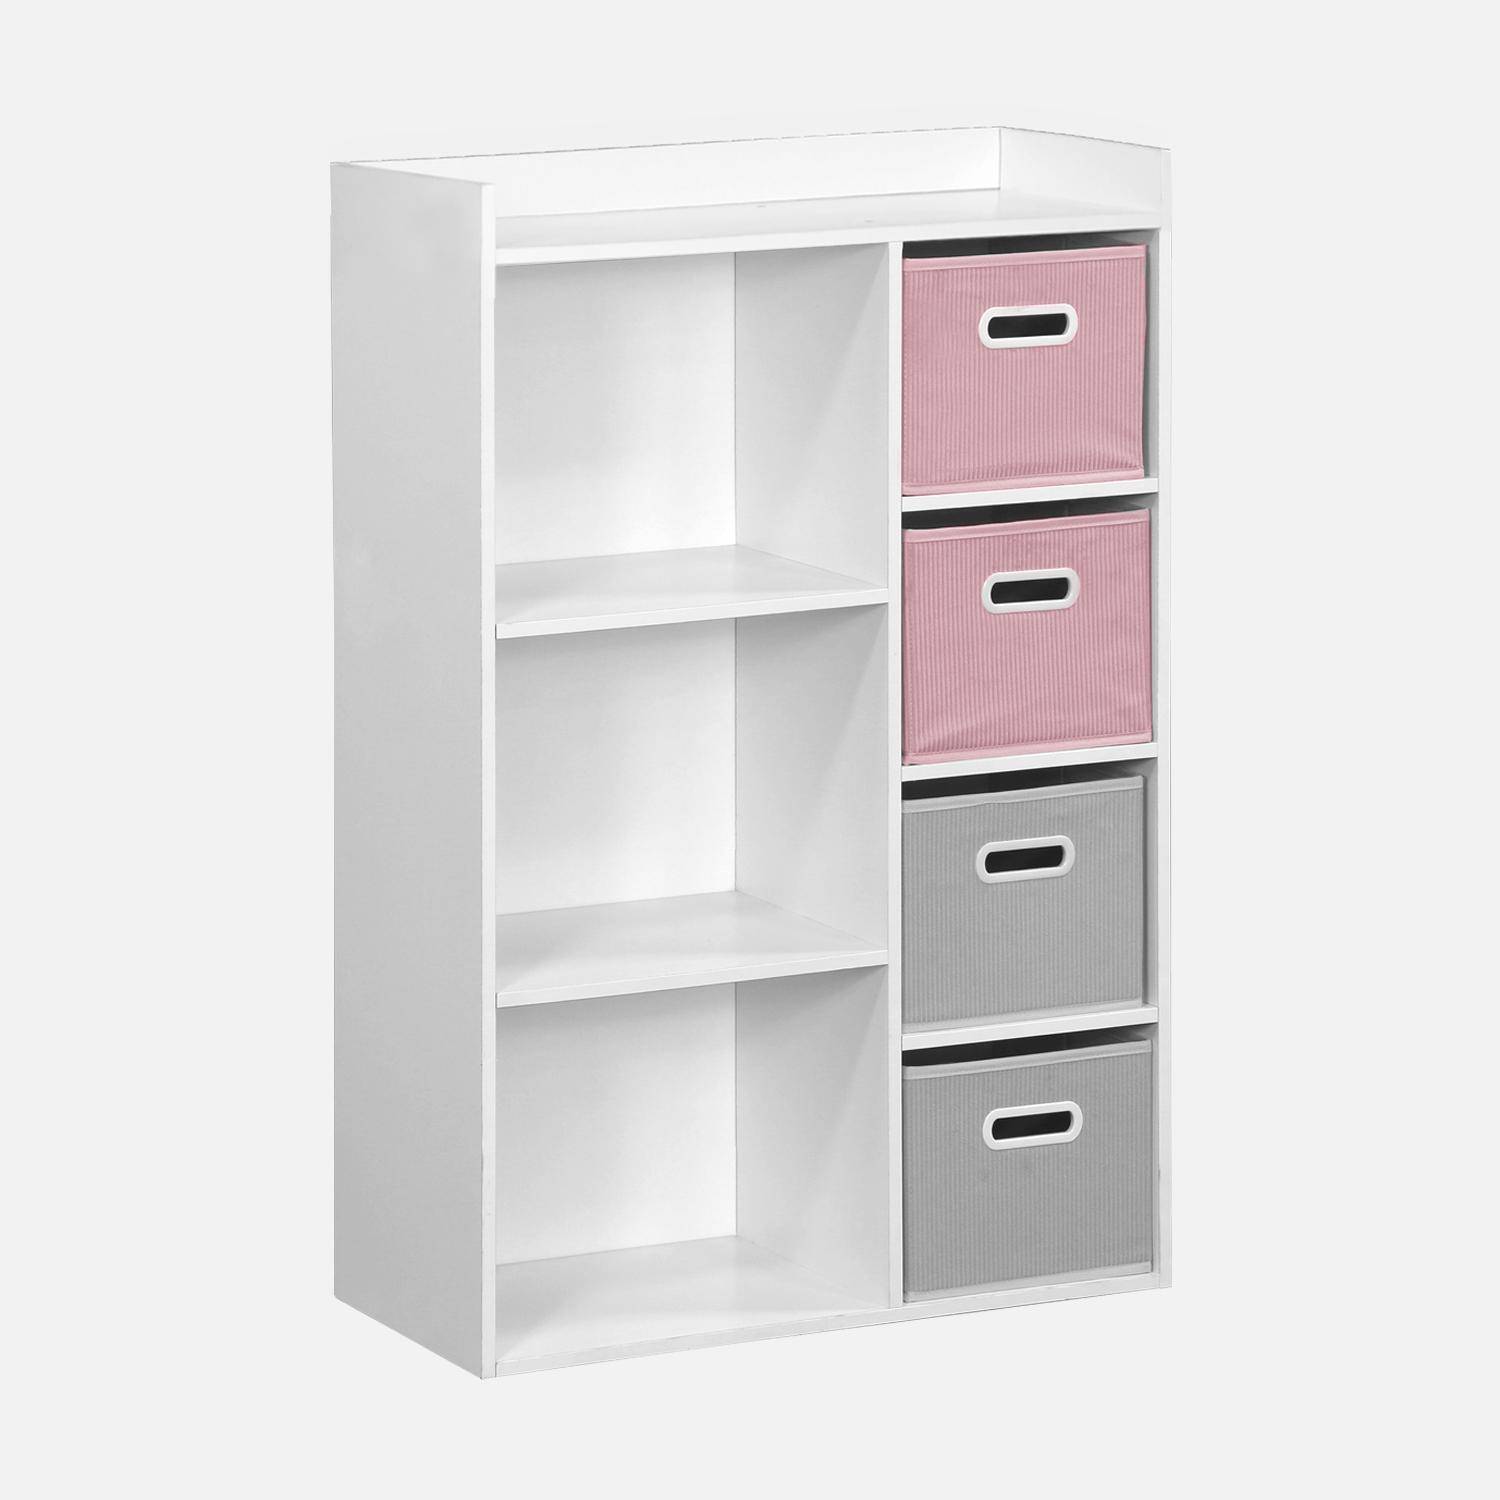 Storage unit for children with 7 compartments and 2 pink and 2 grey velvet baskets Photo1